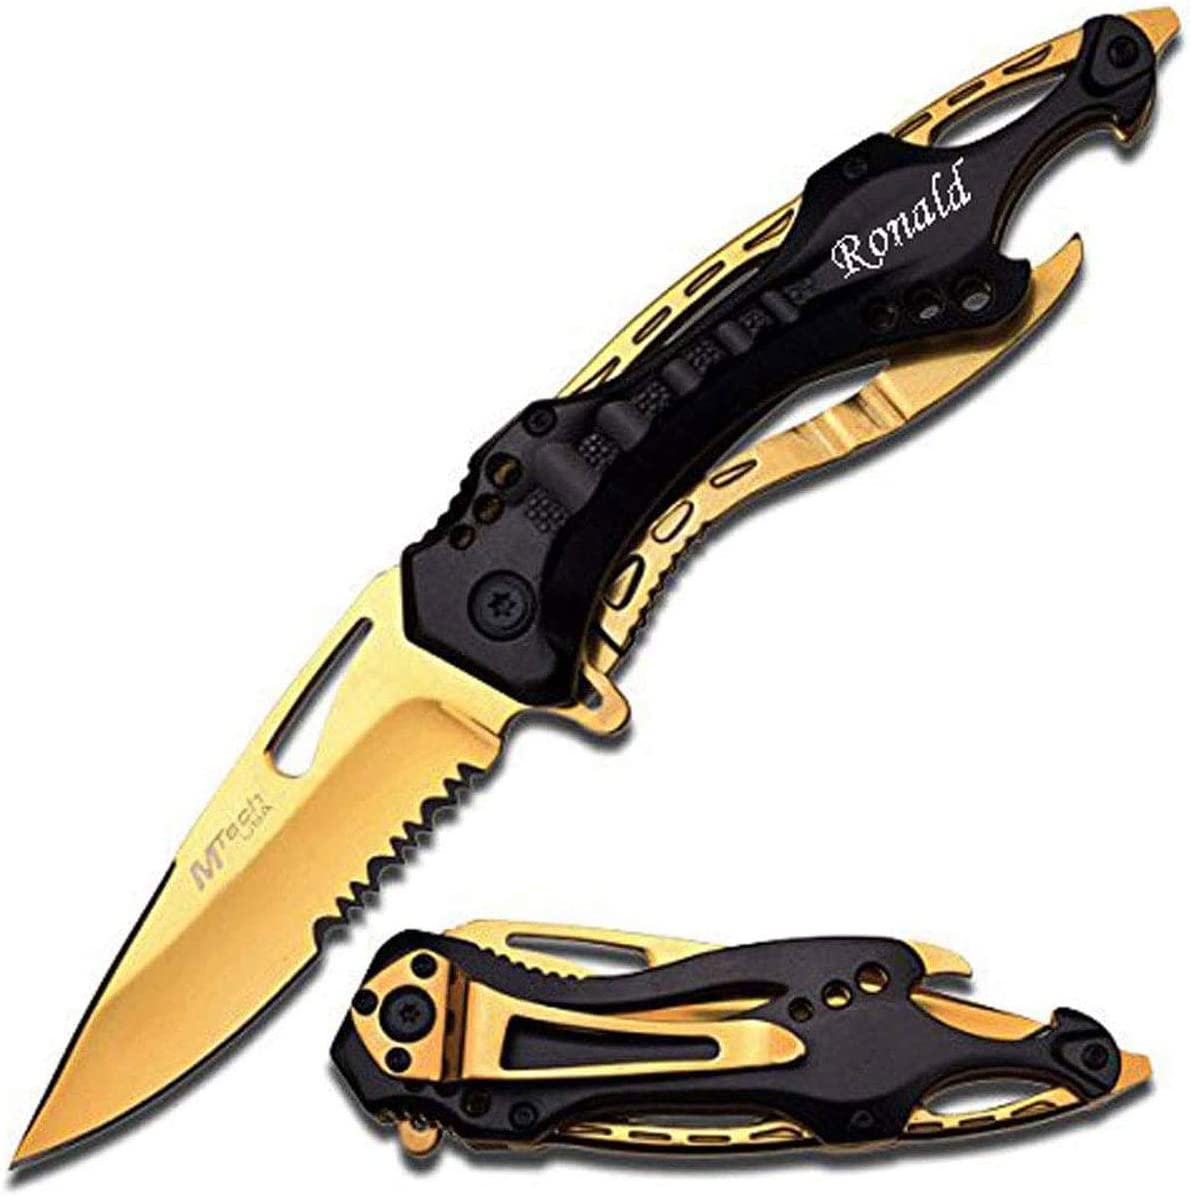 GIFTS INFINITY - 4.5" Closed Blue Steel Personalized Laser Engraved Pocket Knife